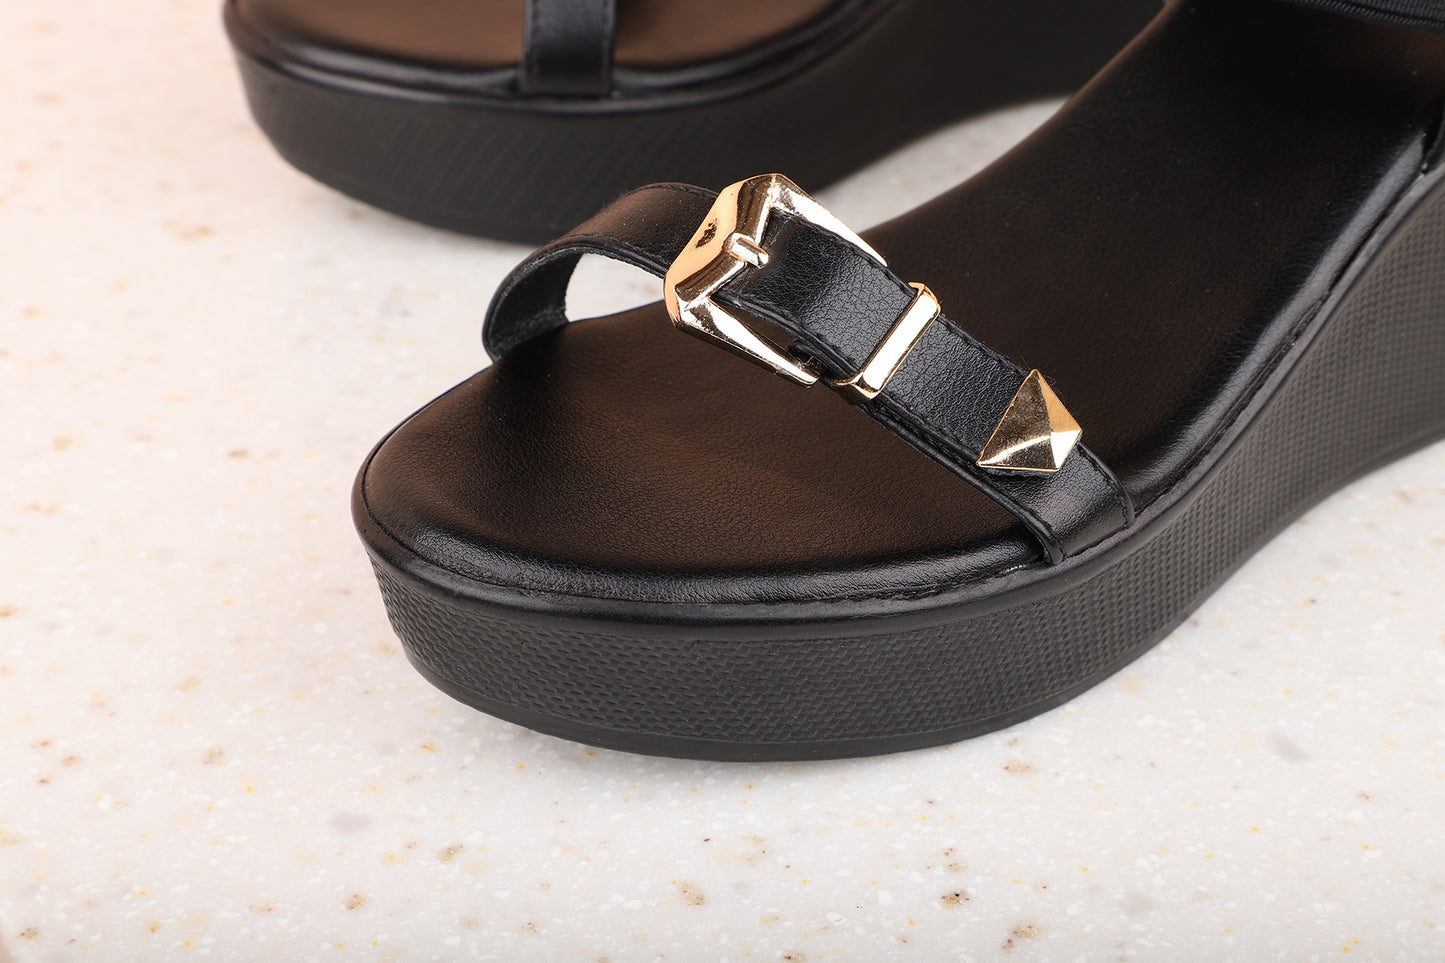 Women Black Wedge Sandals with Buckles